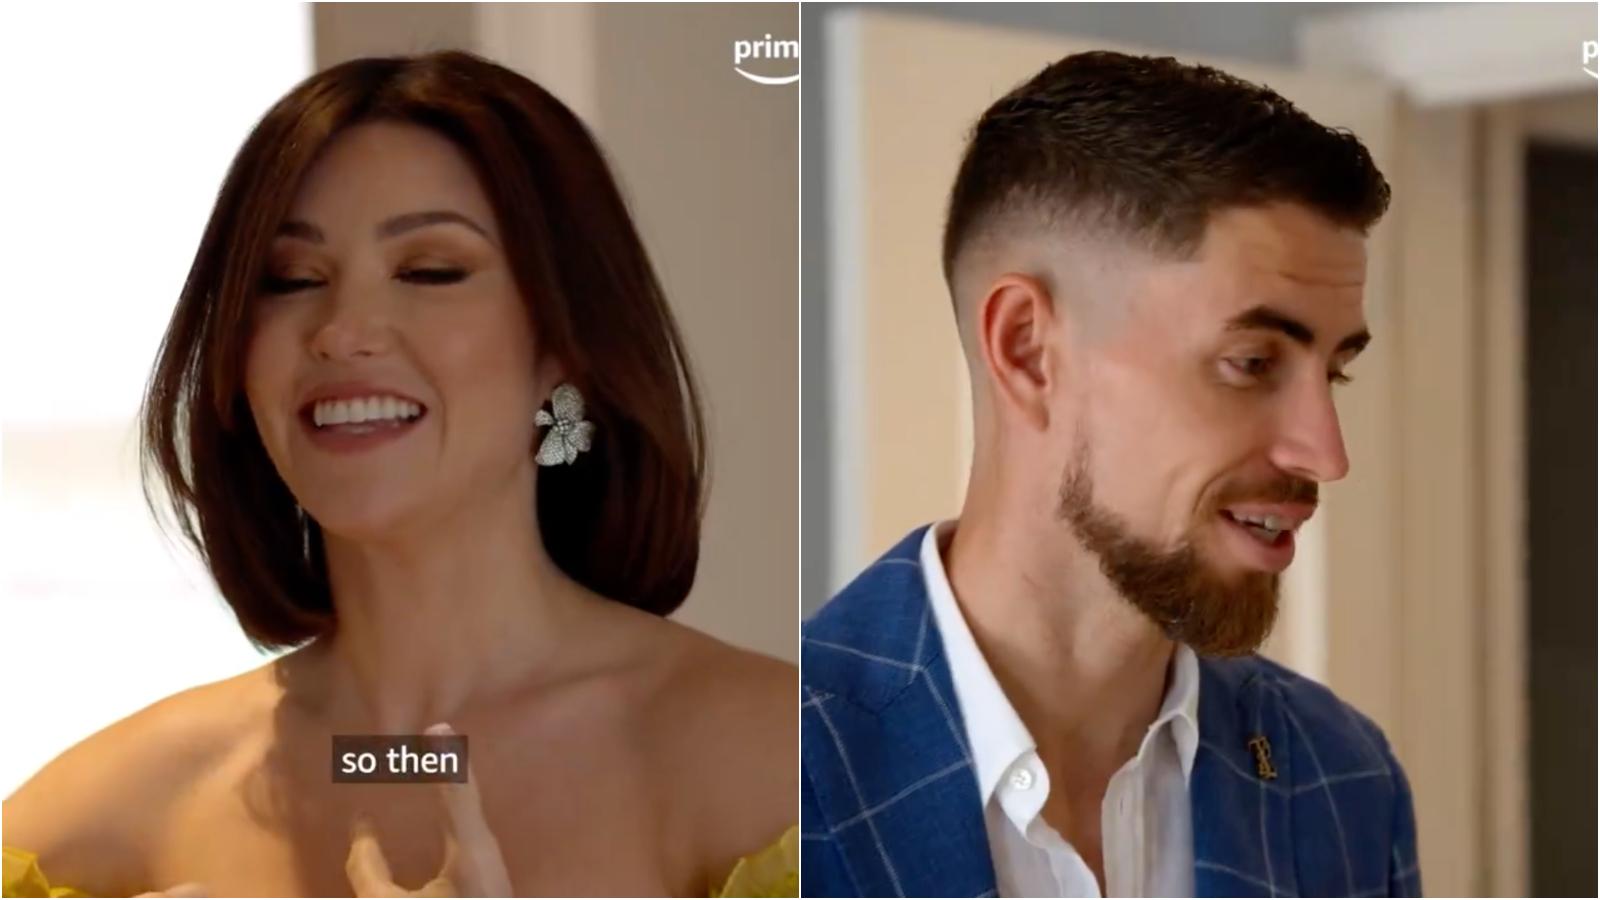 Jorginho and his partner feature on a new Prime Video series